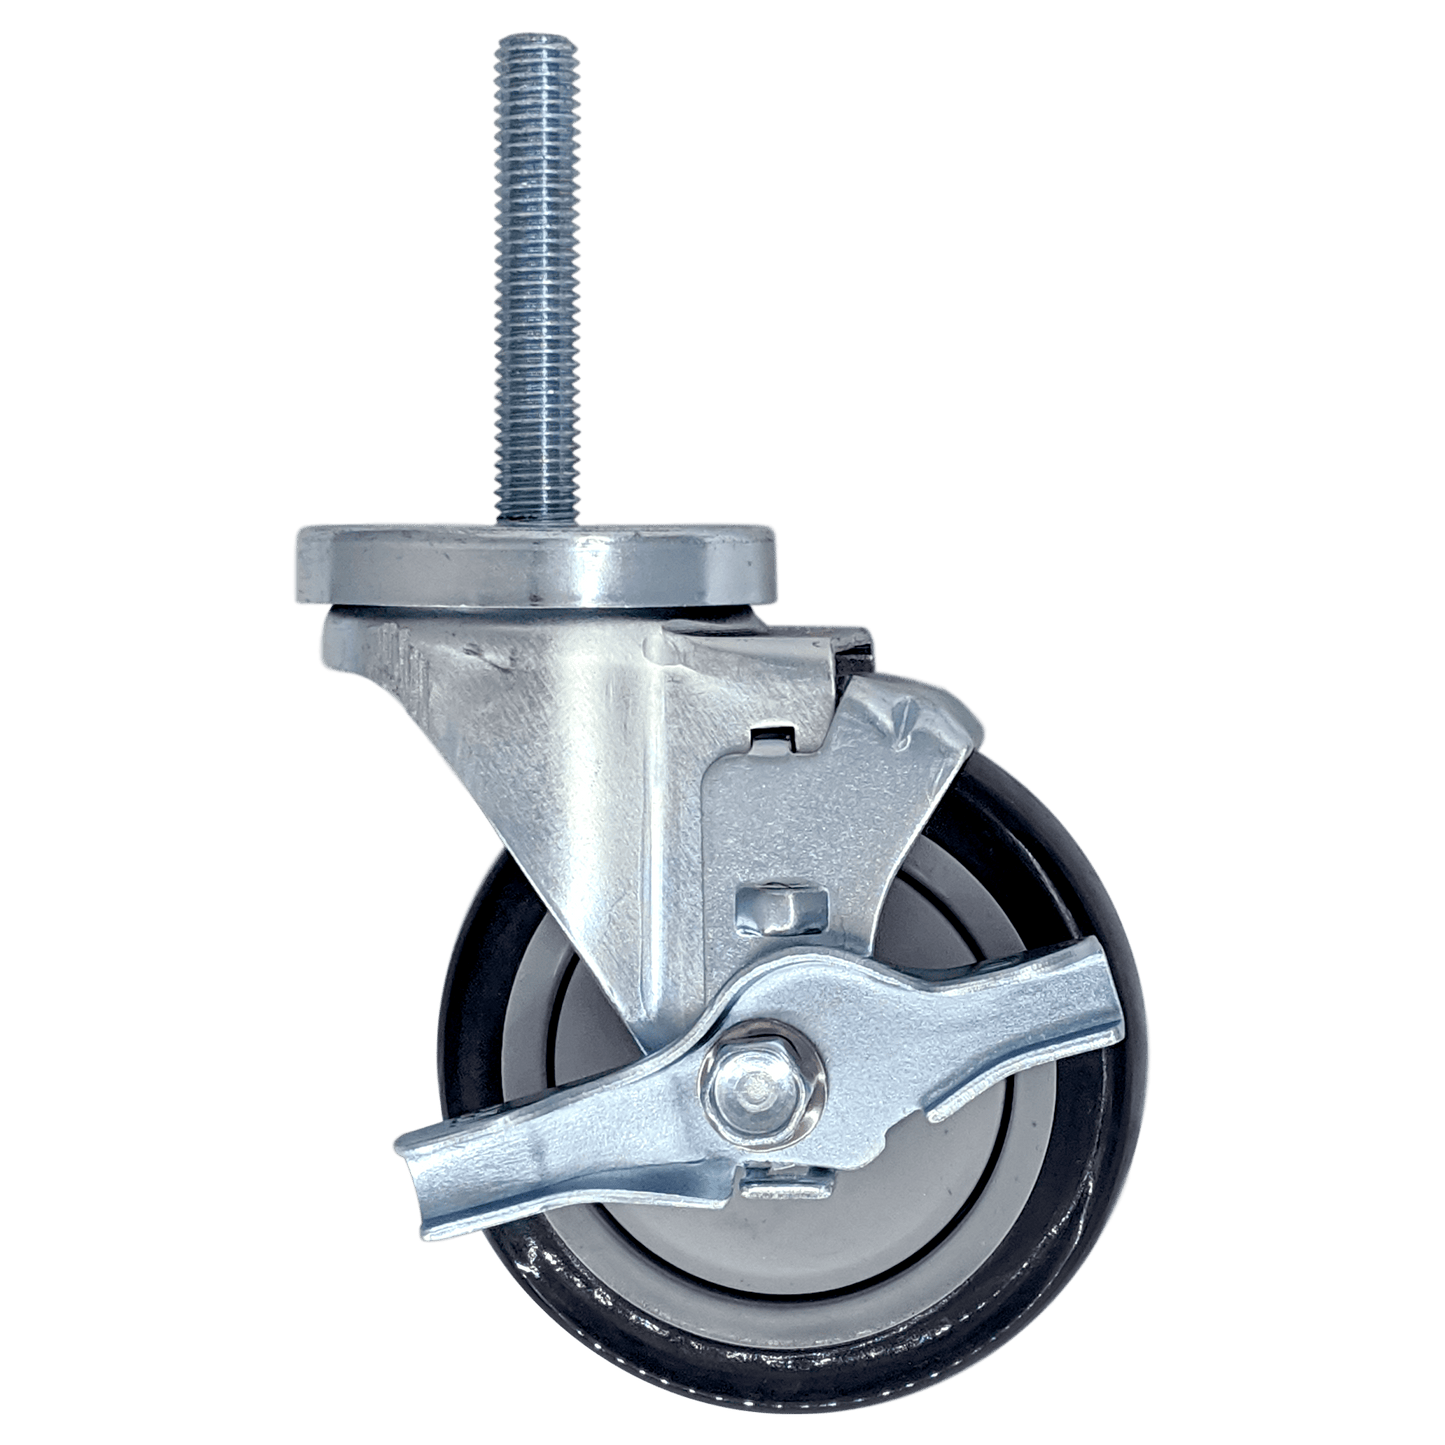 4" x 1-1/4" Poly-Pro Threaded Stem Swivel Caster, Top Lock Brake - 300 lbs. Cap. - Durable Superior Casters